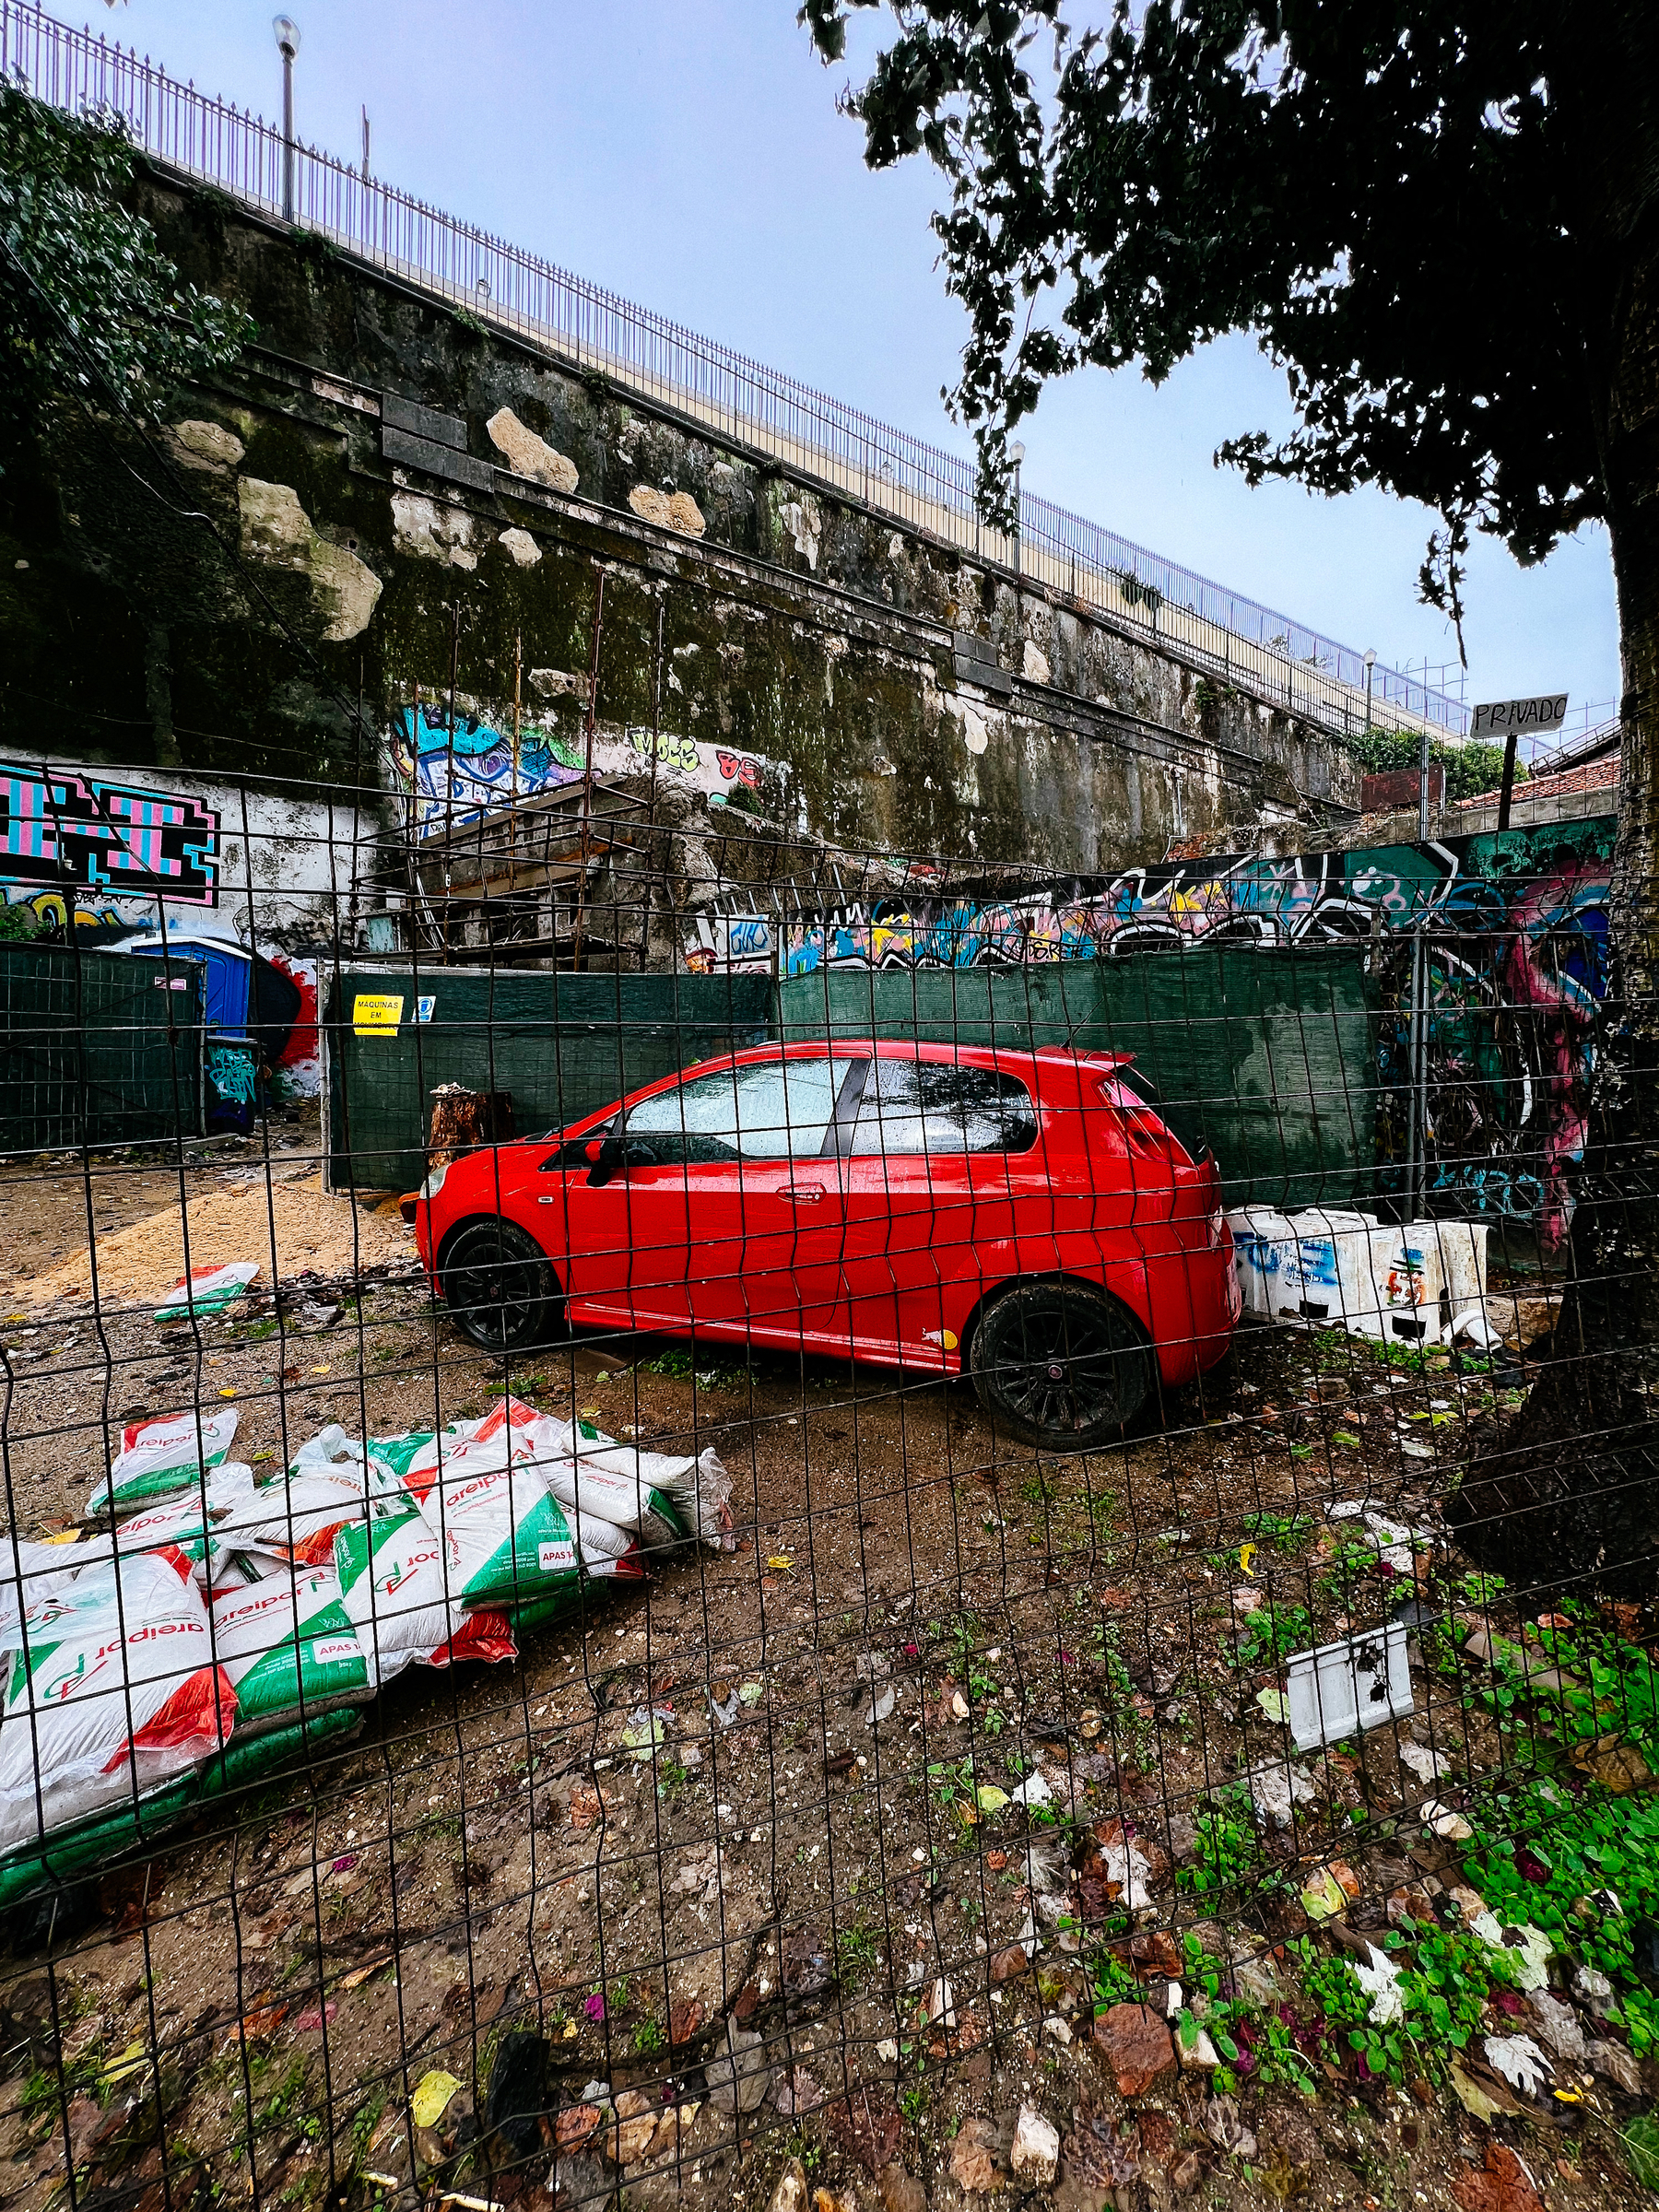 a red car sitting in a vacant lot